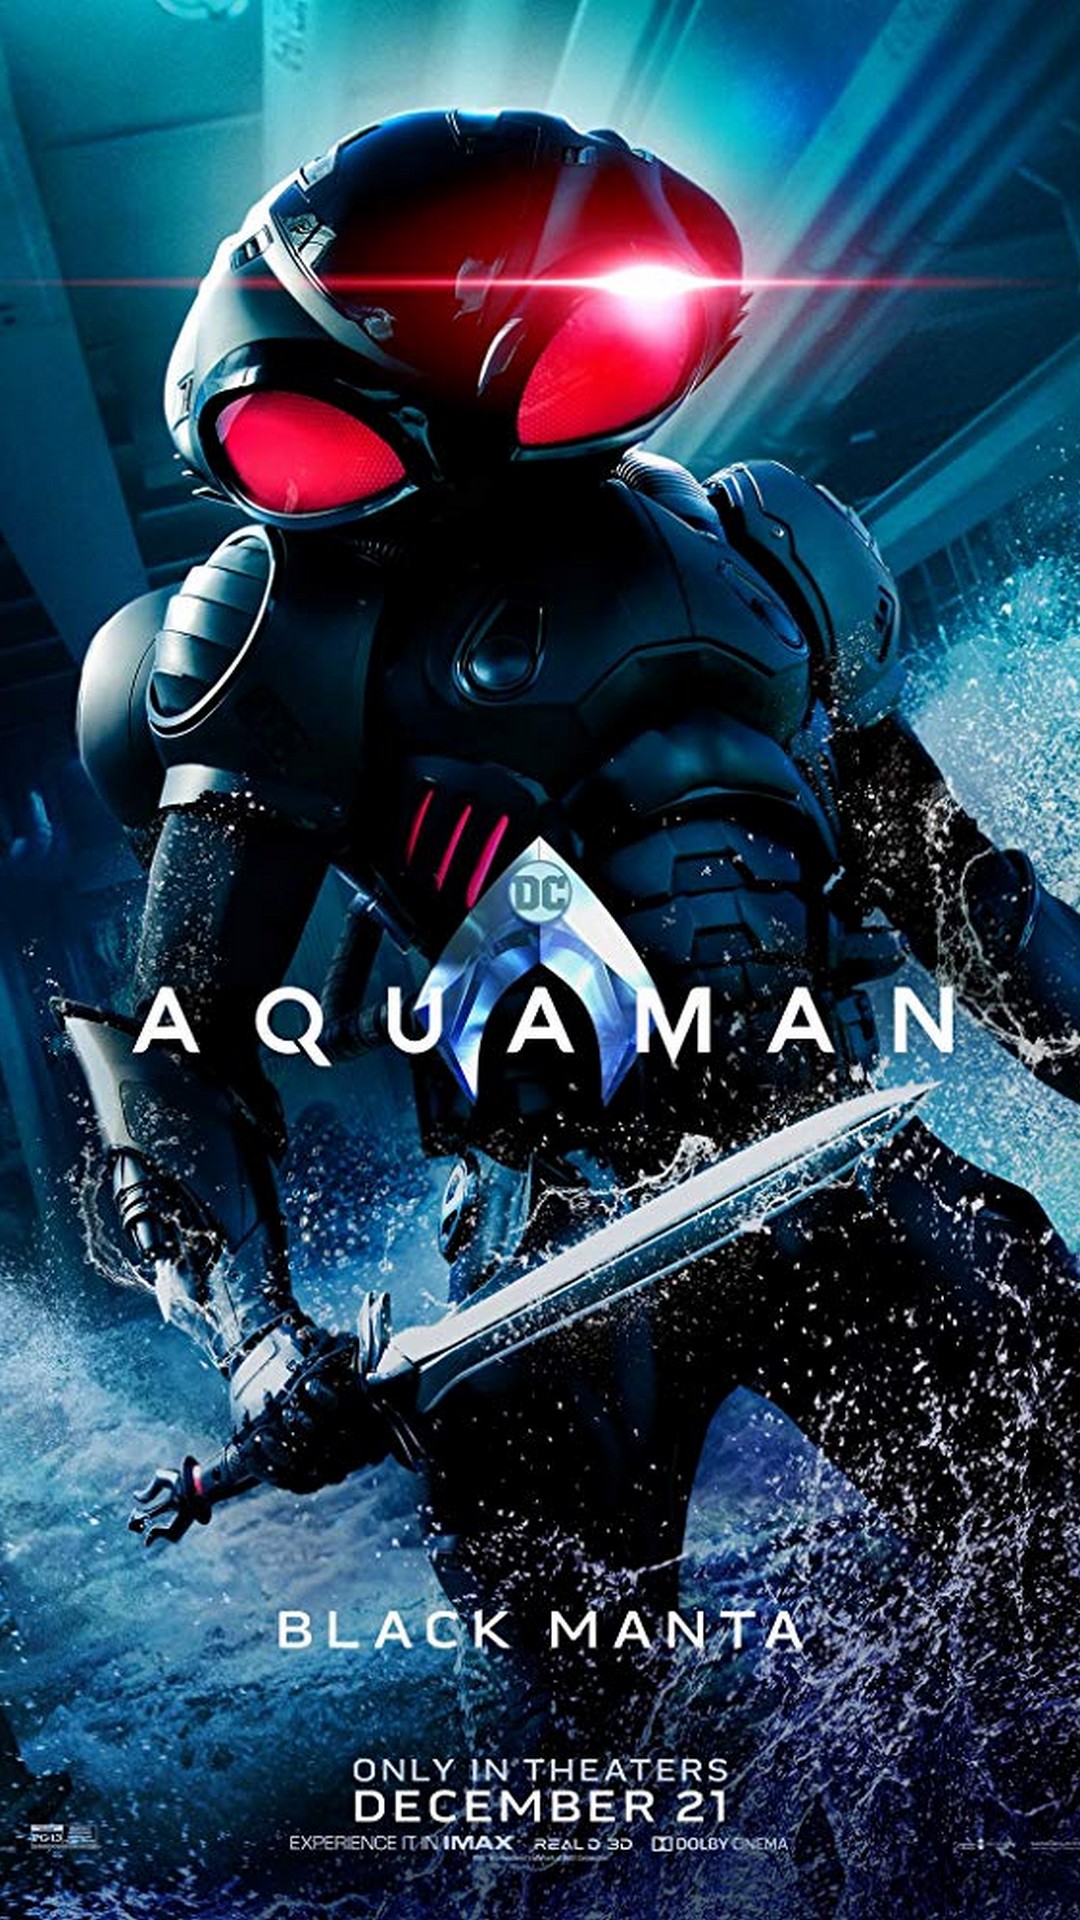 Aquaman 2018 HD Wallpaper For iPhone with image resolution 1080x1920 pixel. You can use this wallpaper as background for your desktop Computer Screensavers, Android or iPhone smartphones